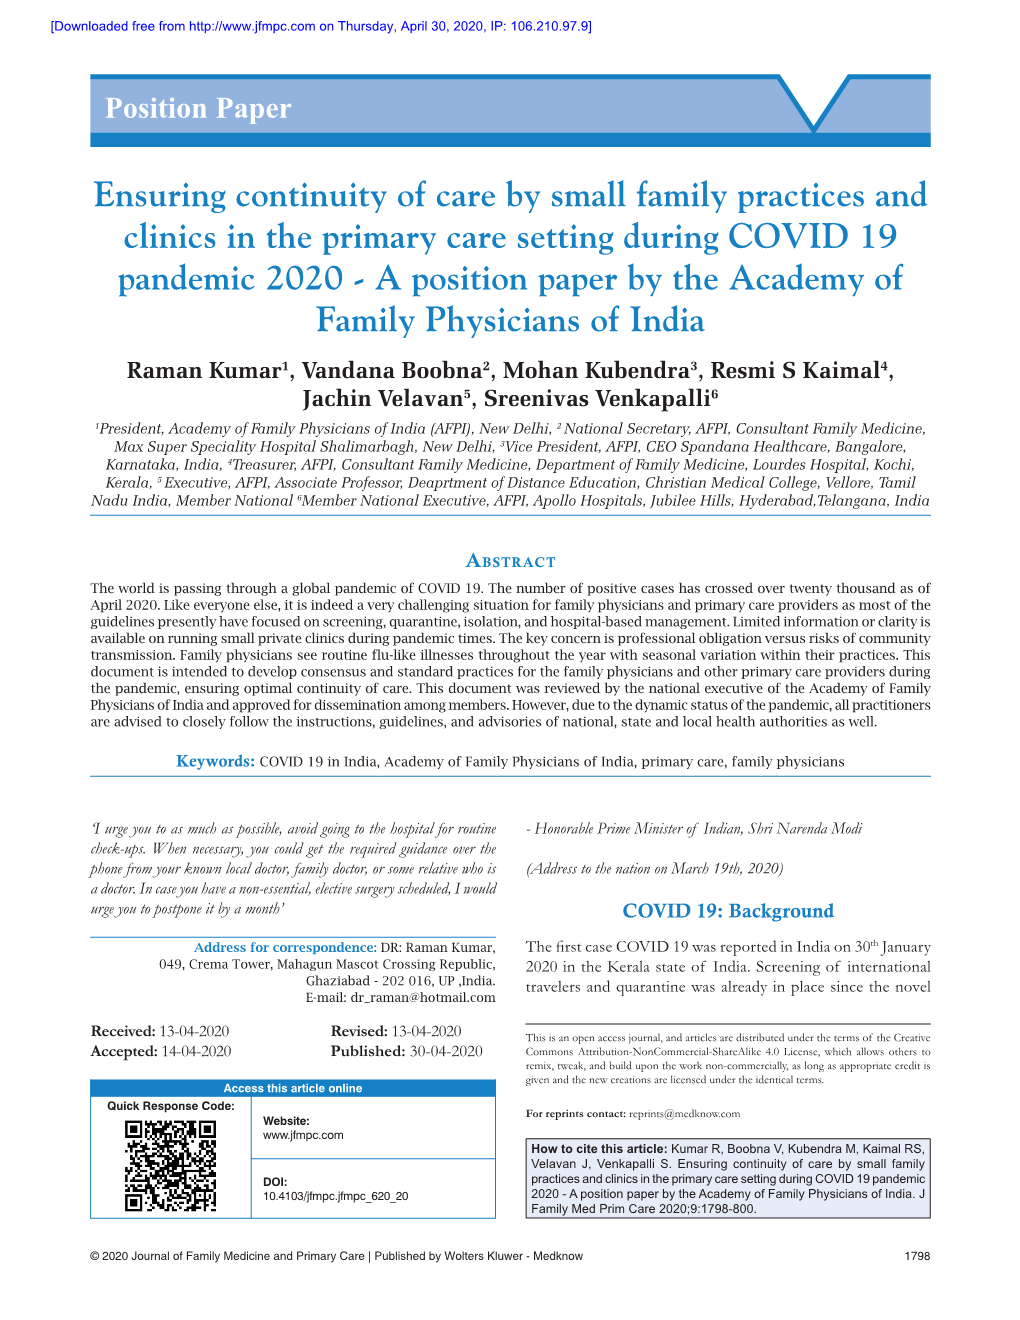 Ensuring Continuity of Care by Small Family Practices And